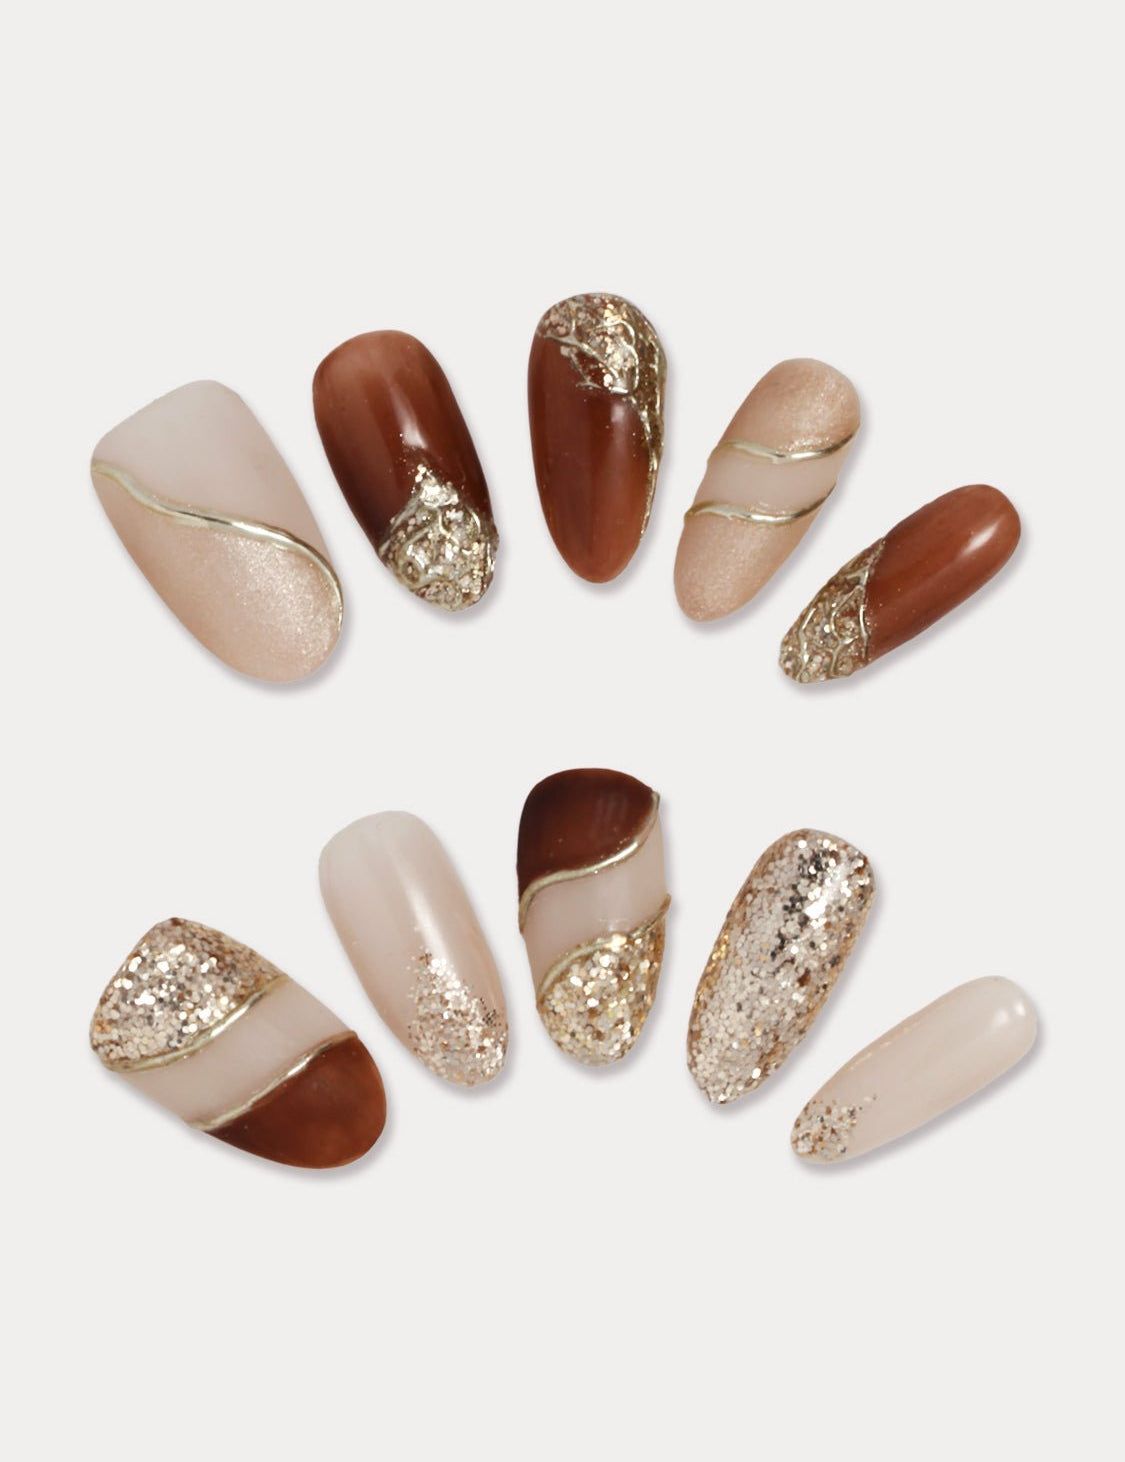 MIEAP Brown Glitter Gold Line press on nail set features 10 different designs for each of your finger. The set offers a combination of matte and glossy top coats, creating a unique AB style on the left and right hands. Indulge in dual nail art experiences with two distinct styles in one nail set. #MIEAP #MIEAPnails #pressonnail #falsenail #acrylicnail #nails #nailart #naildesign #nailinspo #handmadenail #summernail #nail2023 #graduationnail #glitternail #ovalnail #mattenail #datingnail #promnail